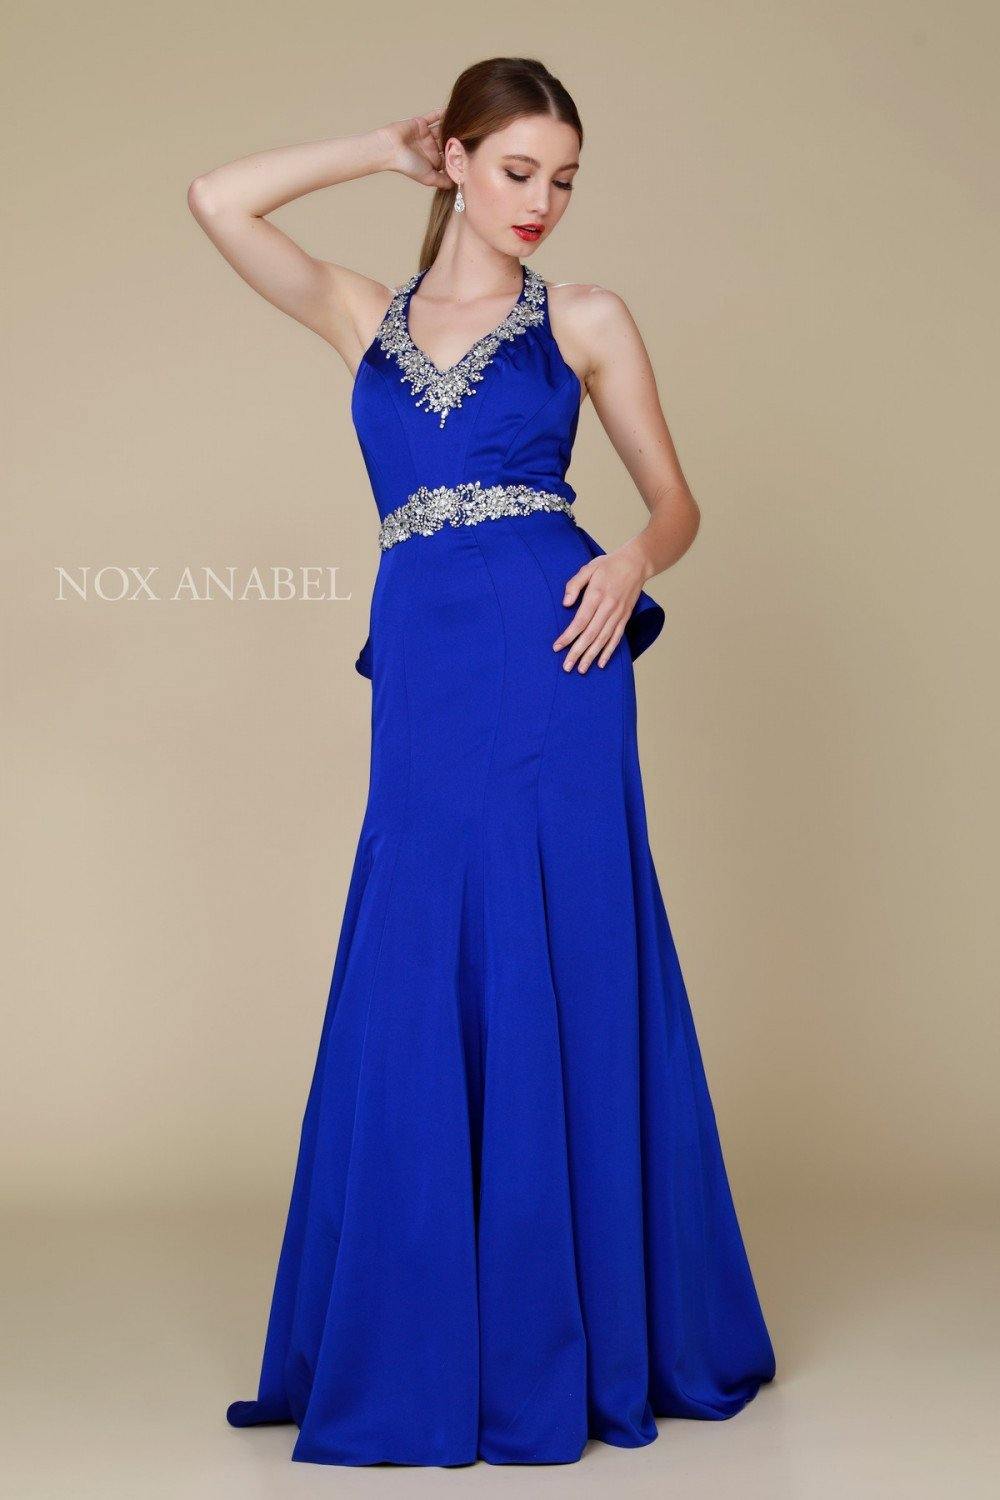 Long Beaded Ruffled Prom Dress Formal - The Dress Outlet Nox Anabel